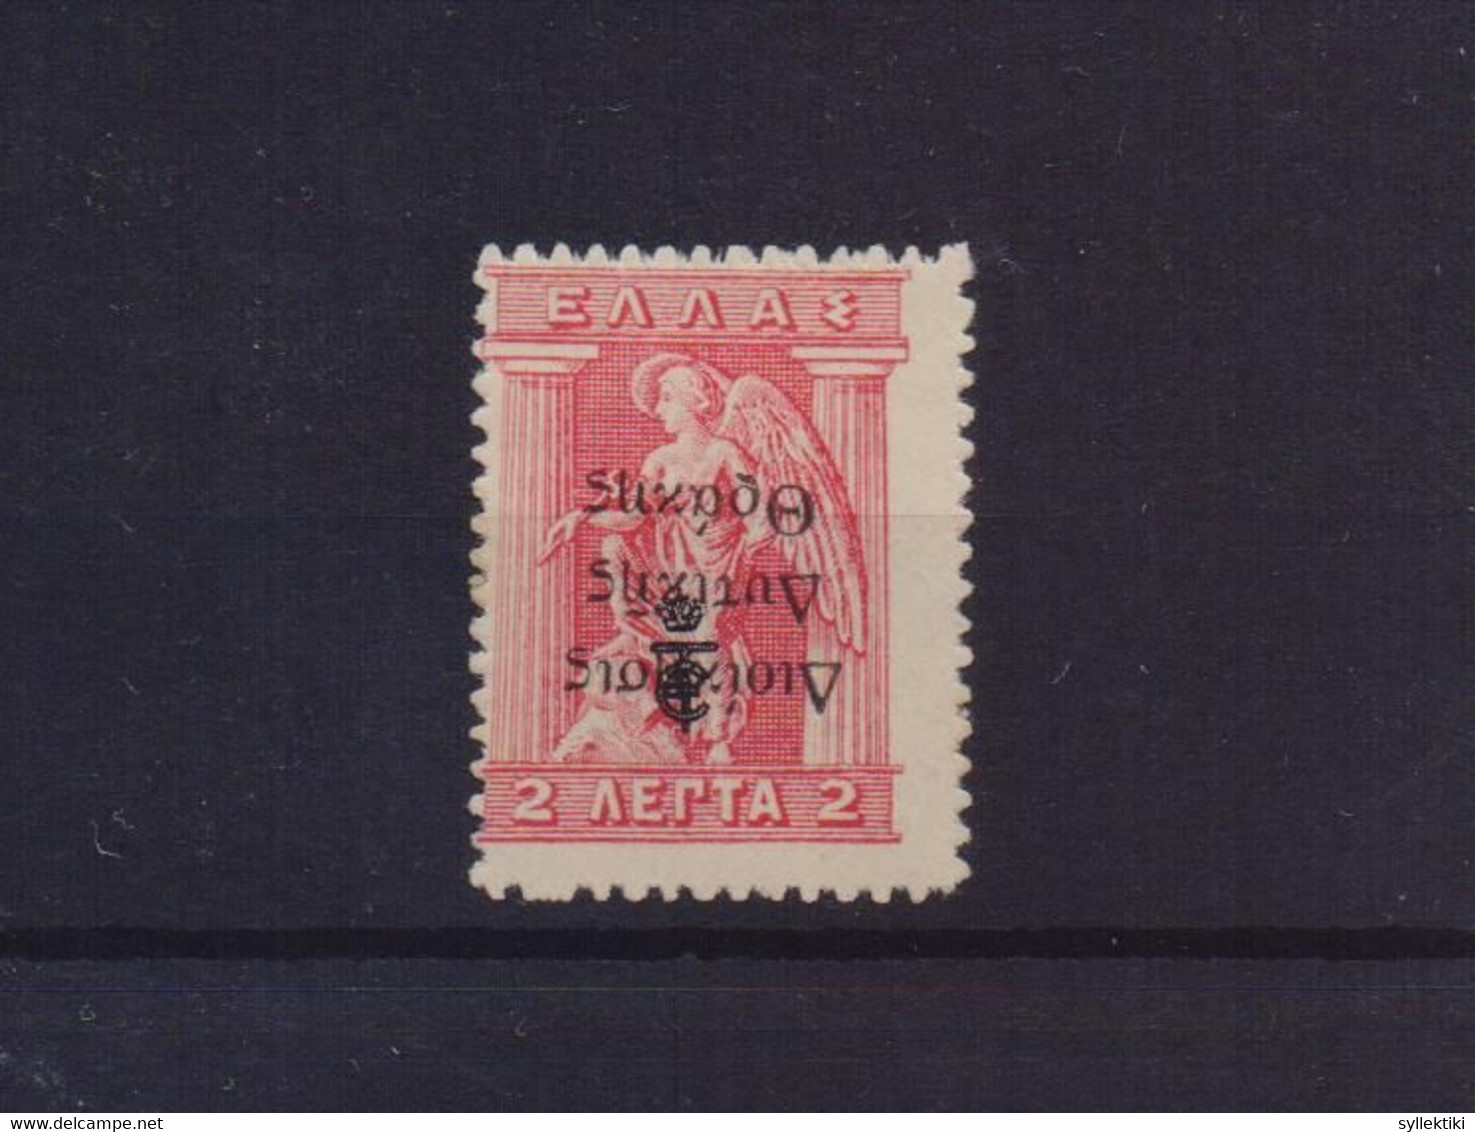 GREECE 1920 WESTERN THRACE ADMIN. INVERTED OVERPRINT 2 LEPTA E.T.  MH STAMP - Thracië